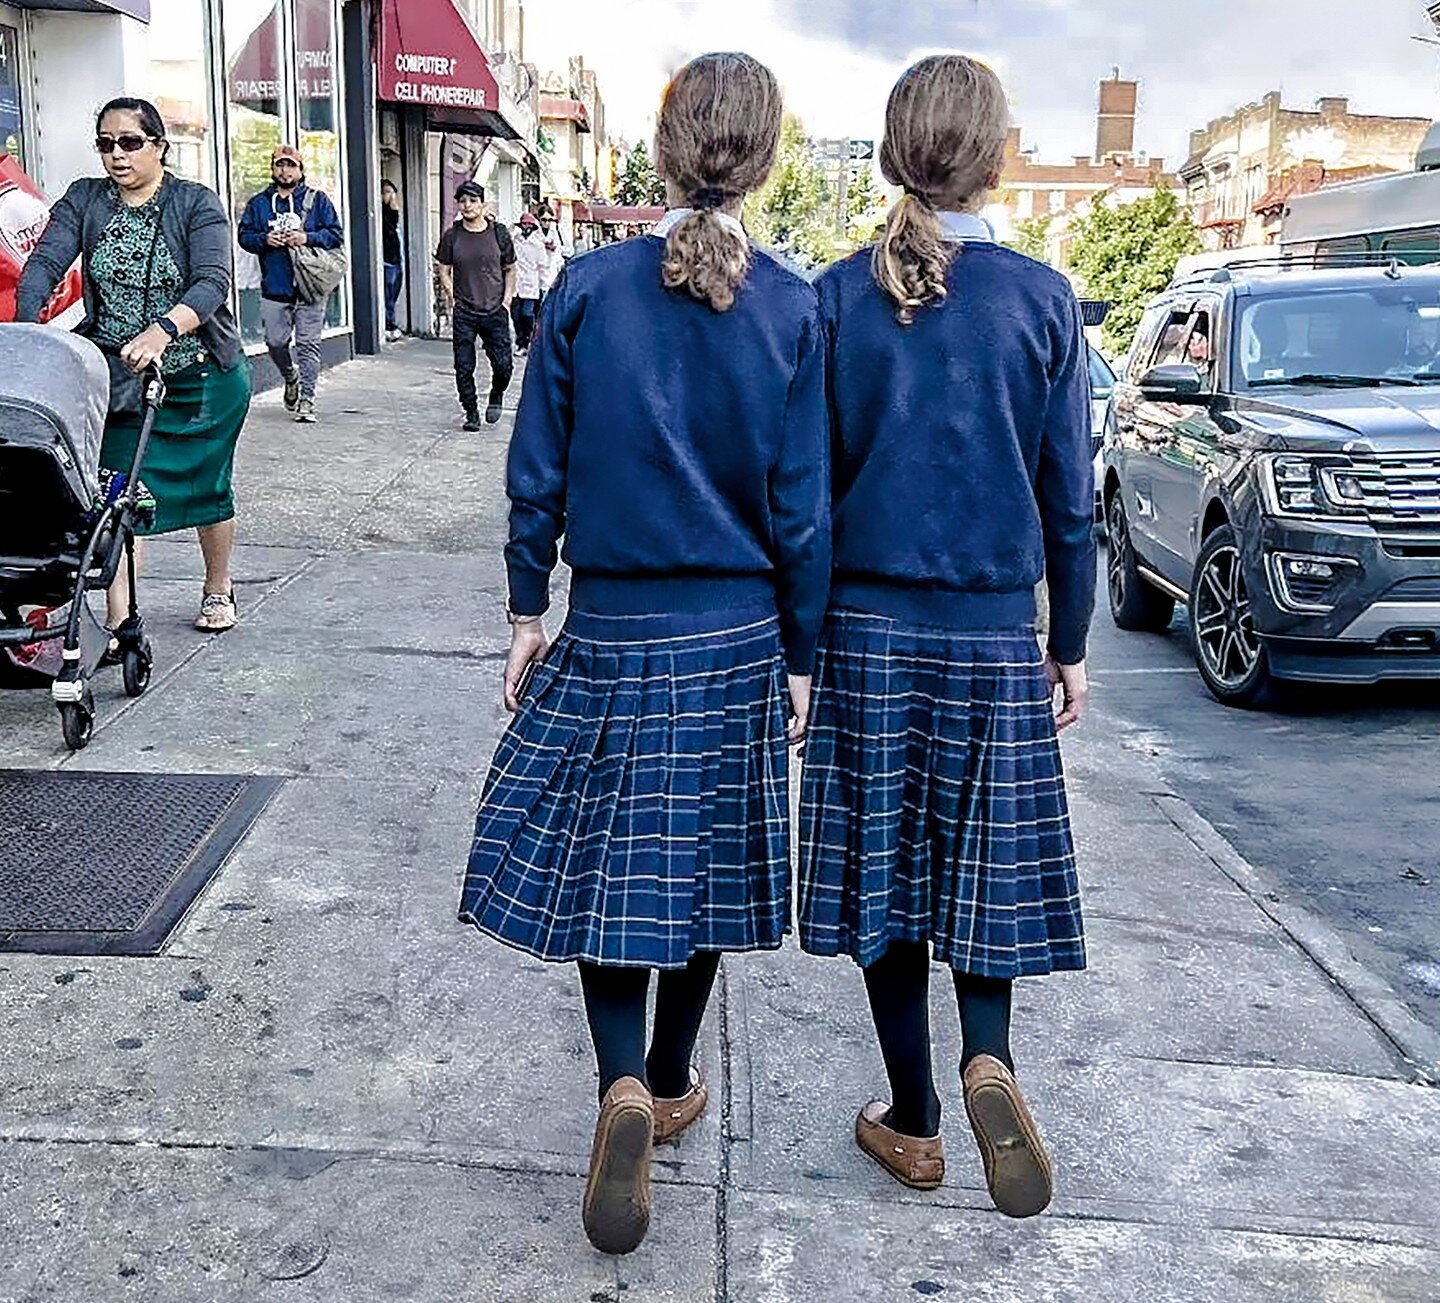 Bensonhurst twins, holding hands. #redrum 
.
.
.
.
#afterschoolspecial #twins #dianaarbus #southbrooklyn #18thave #kilts #womenstreetphotographers #everydayusa #everydayeverywhere #thepictorialist #womenstreetphotographers #life_is_street #streetphot